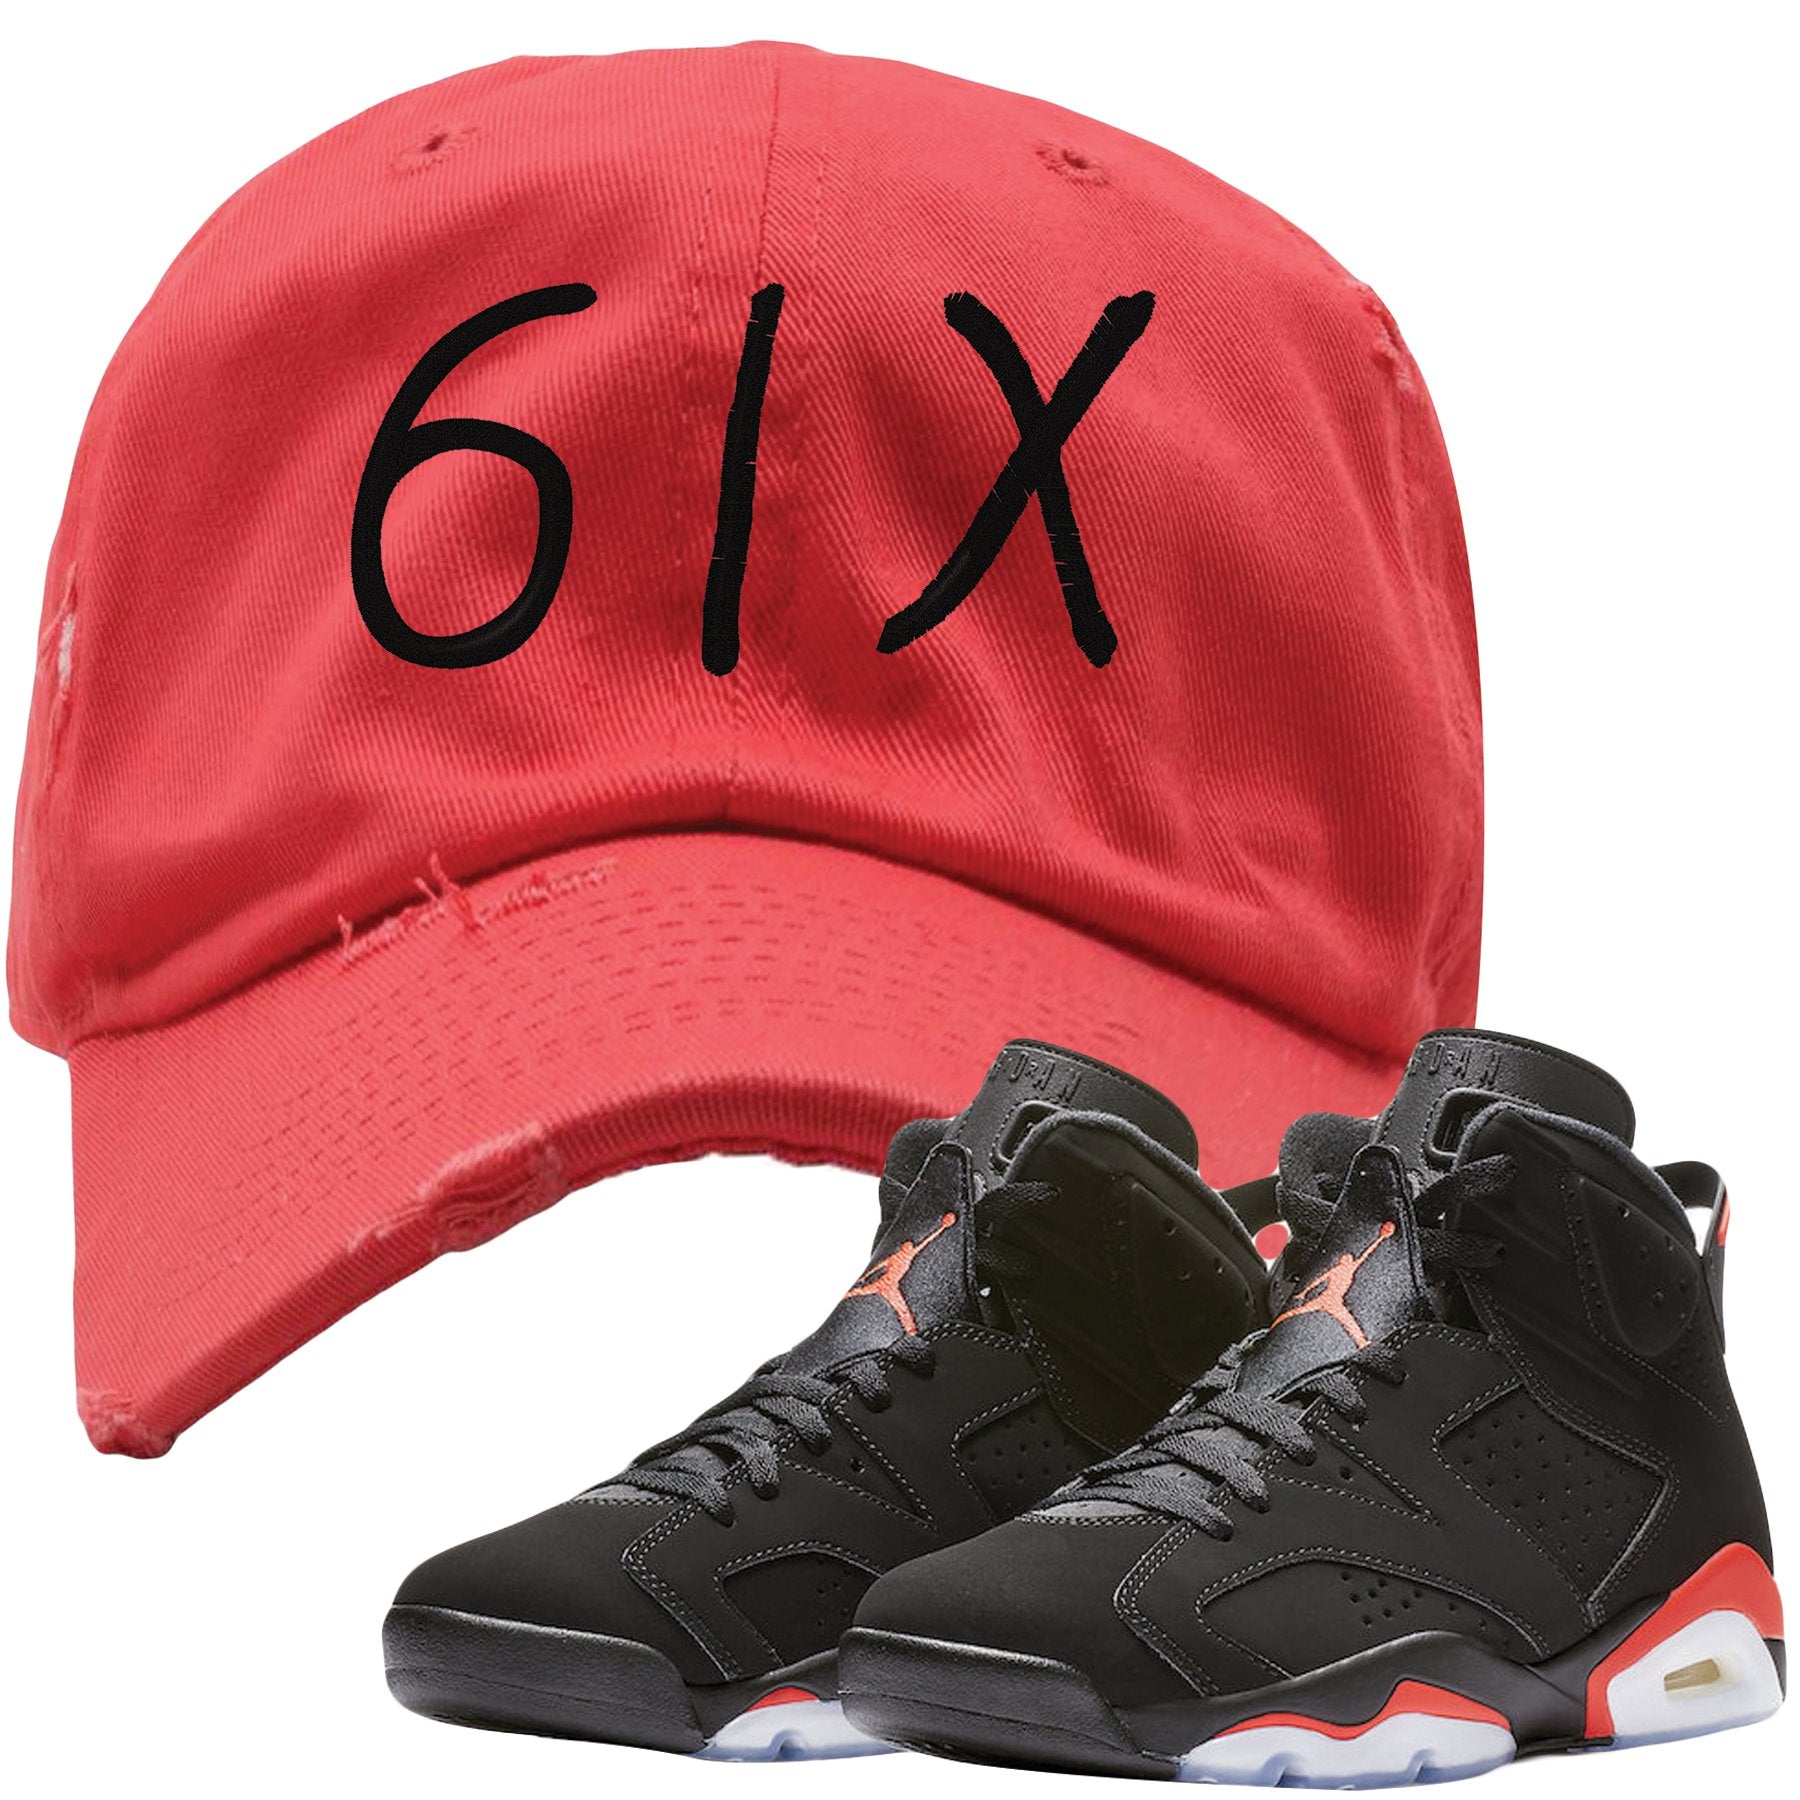 The Jordan 6 Infrared Distressed Dad Hat is custom designed to perfectly match the retro Jordan 6 Infrared sneakers from Nike.